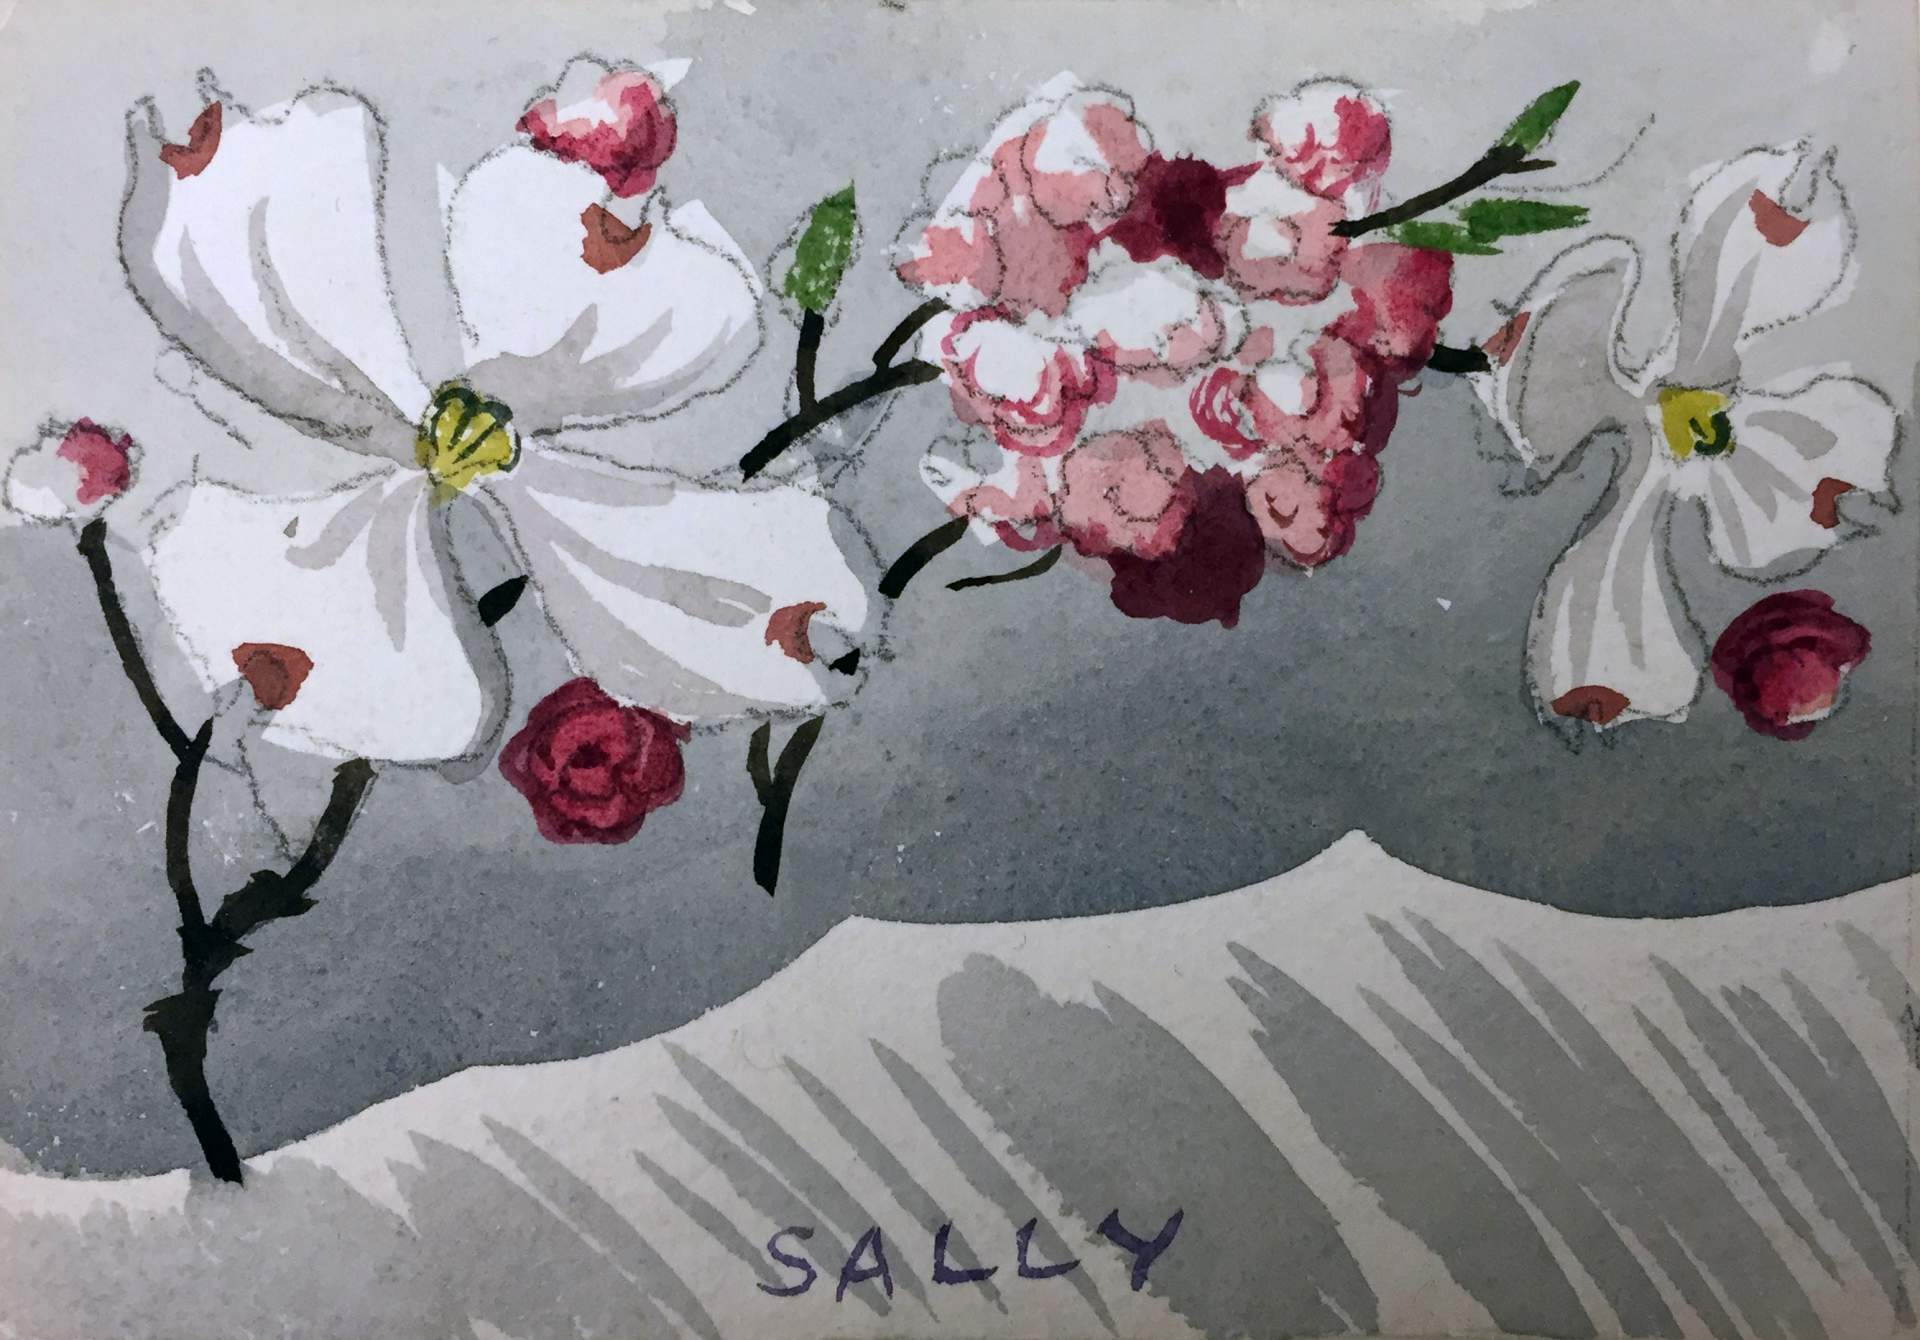 “Sally” with white dogwood and pink hawthorn